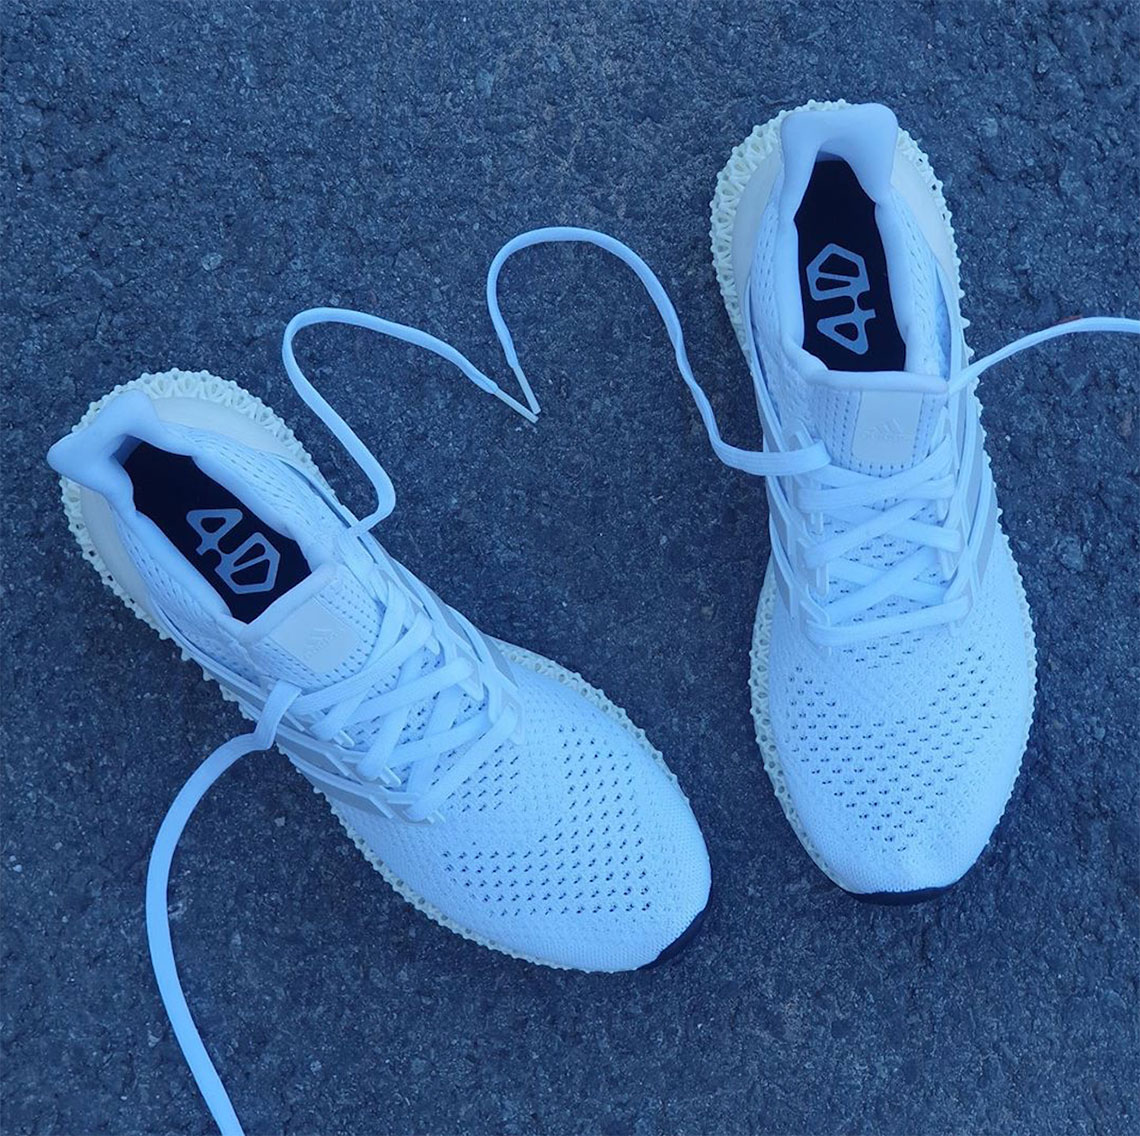 Adidas Ultra Boost 4d Shoes 3